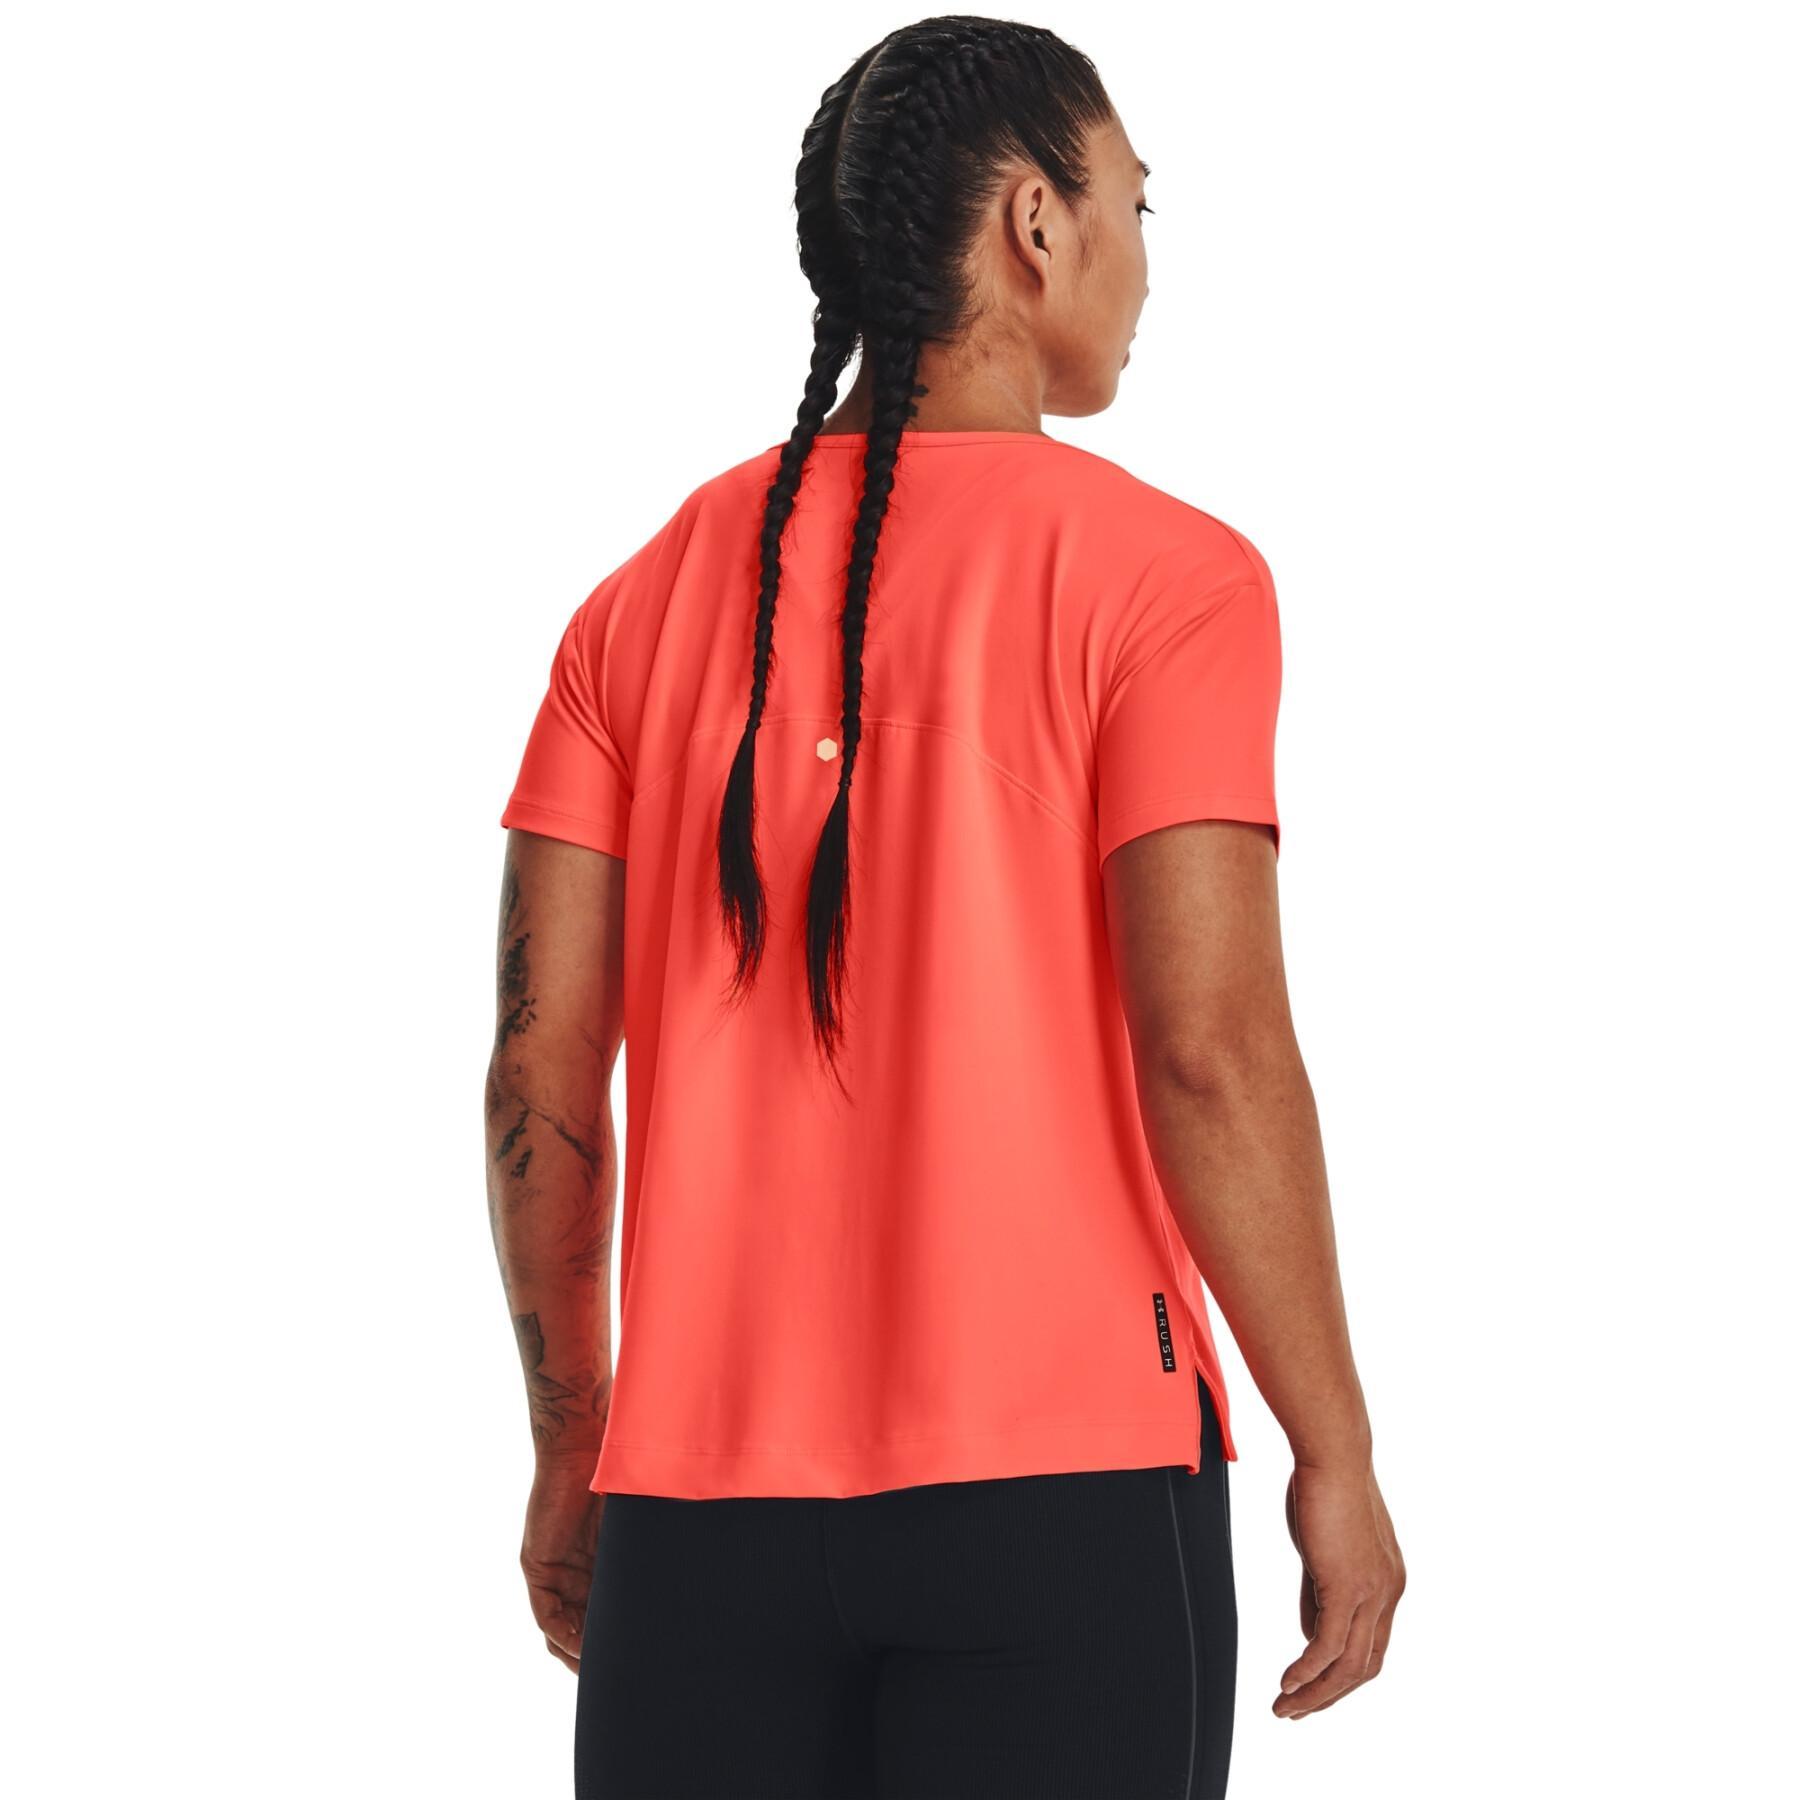 Maillot femme Under Armour RUSH™ Energy Core